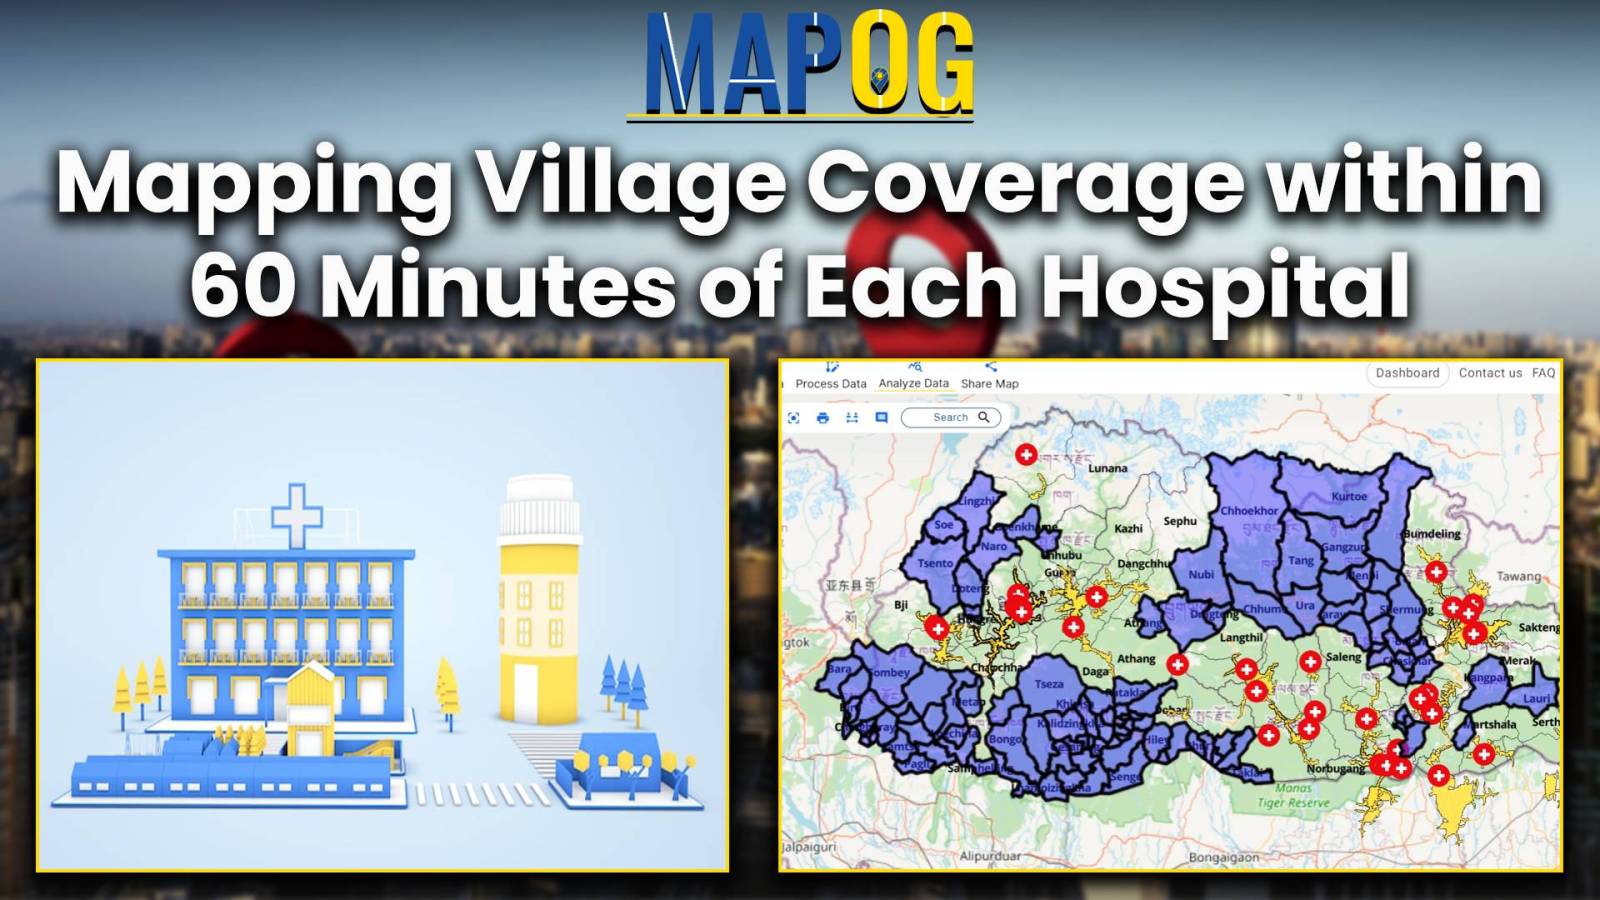 Mapping Village Coverage within 60 Minutes of Each Hospital